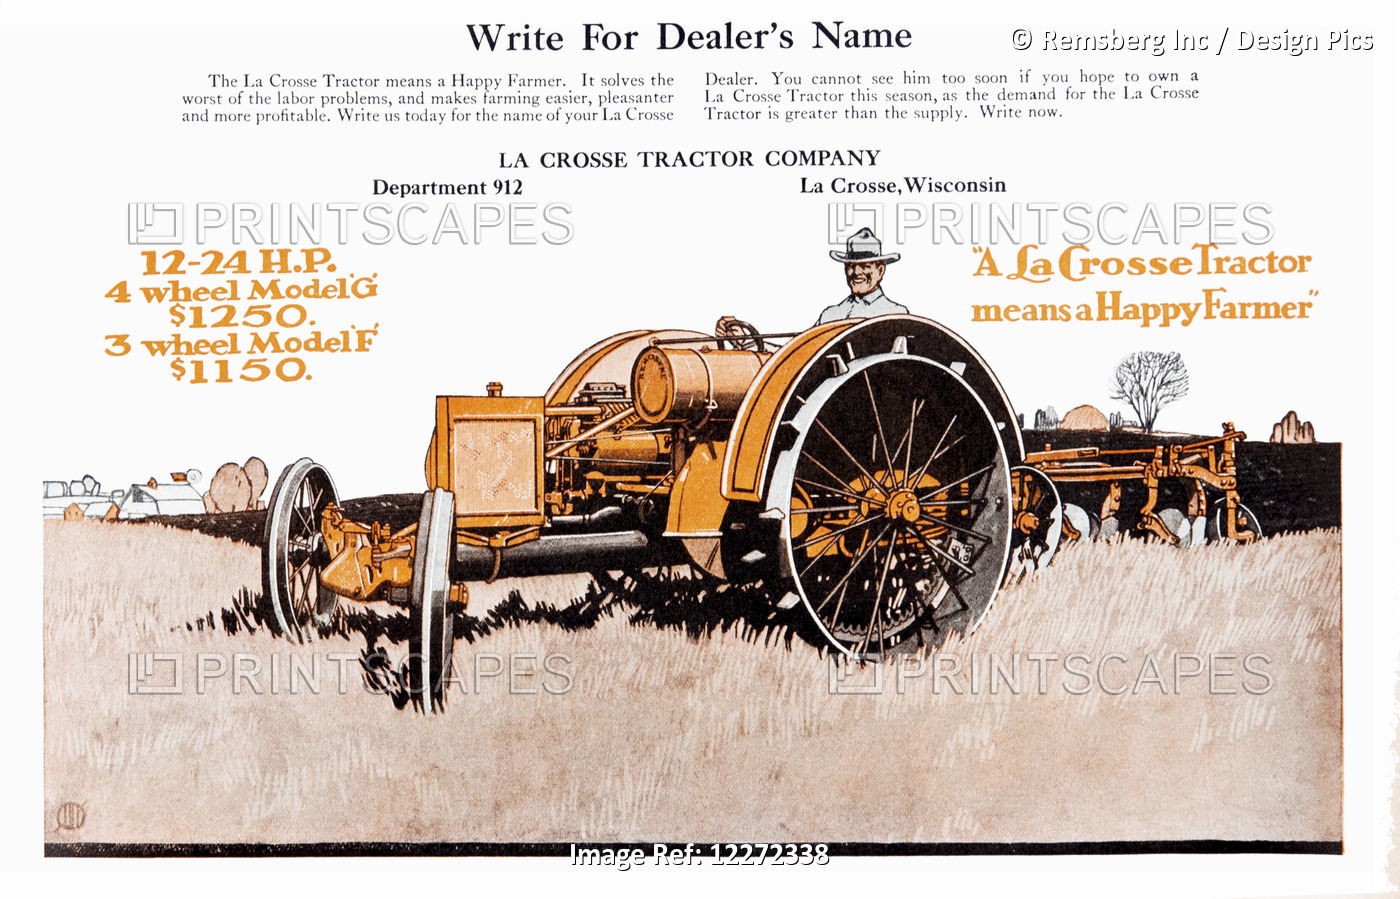 Lacrosse Tractor Advertisement From The Early 20th Century.